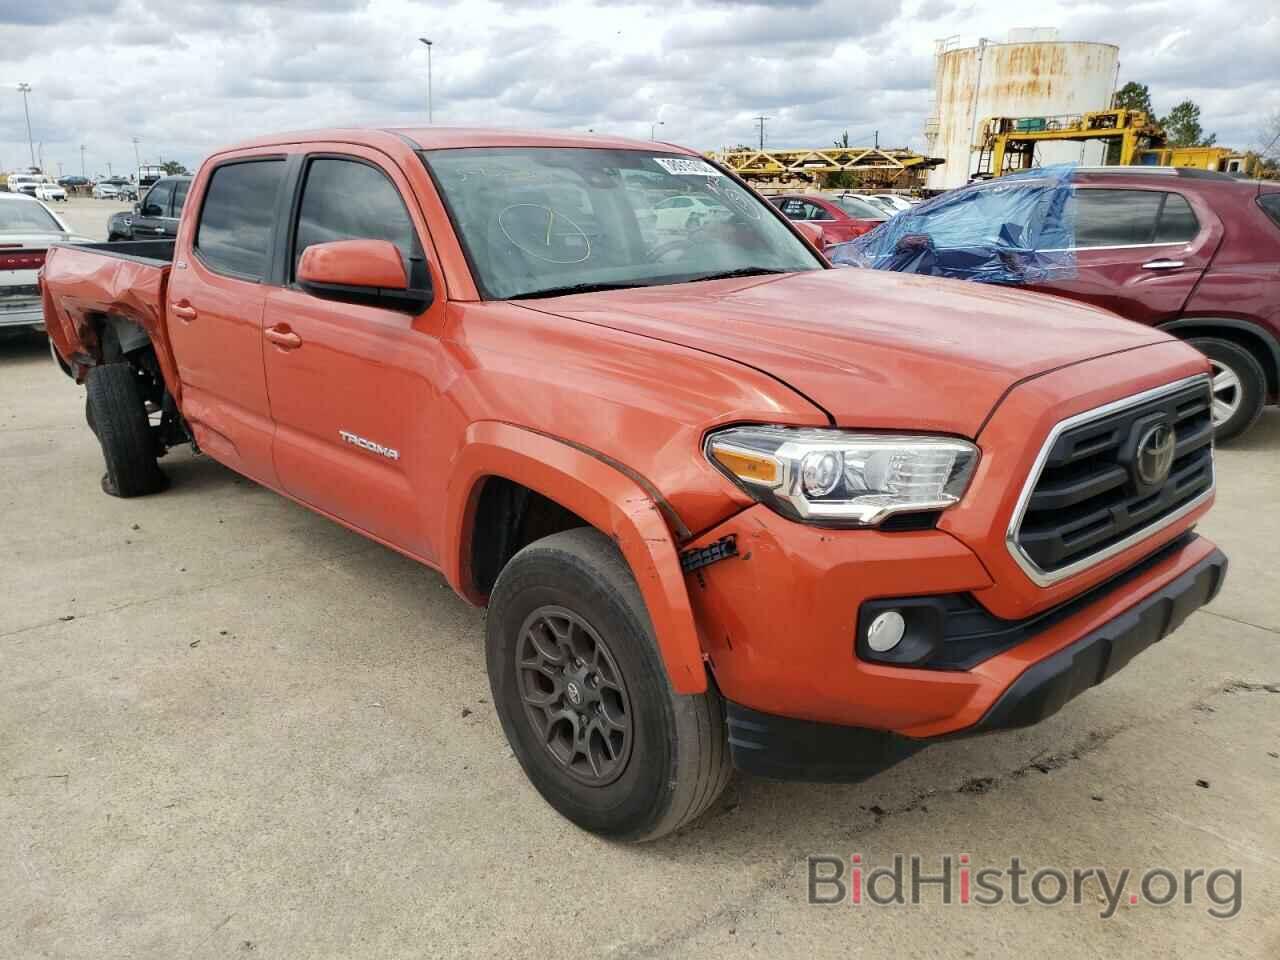 View TOYOTA TACOMA history at insurance auctions Copart and IAAI 